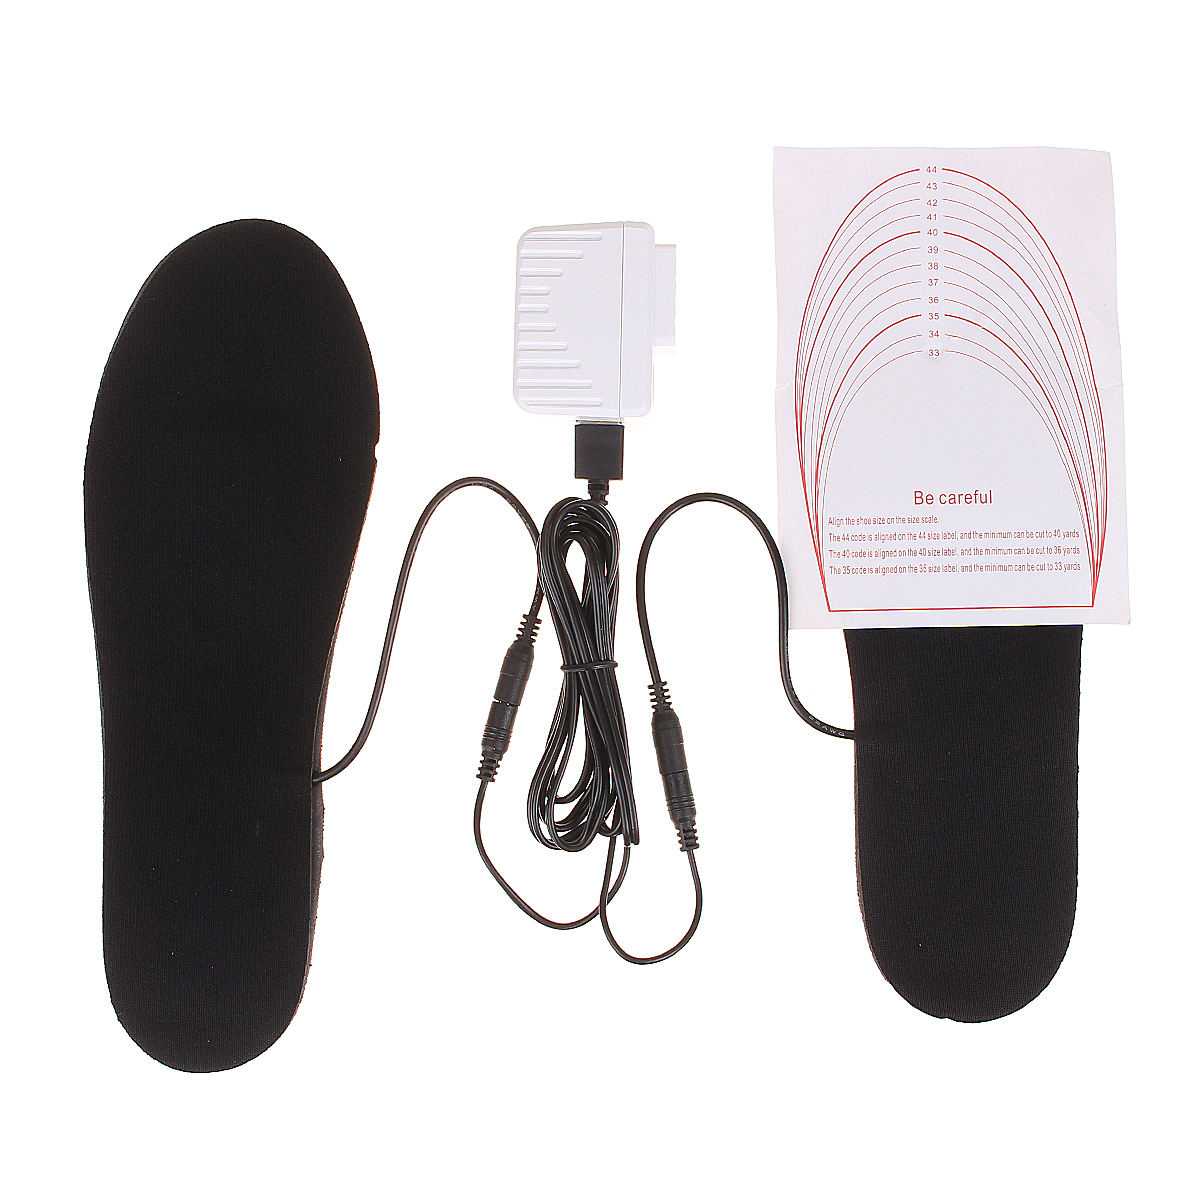 

DC 5V 2A Cuttable Electric Heated Insoles USB Winter Foot Warm Pad Shoe Inserts Warmer